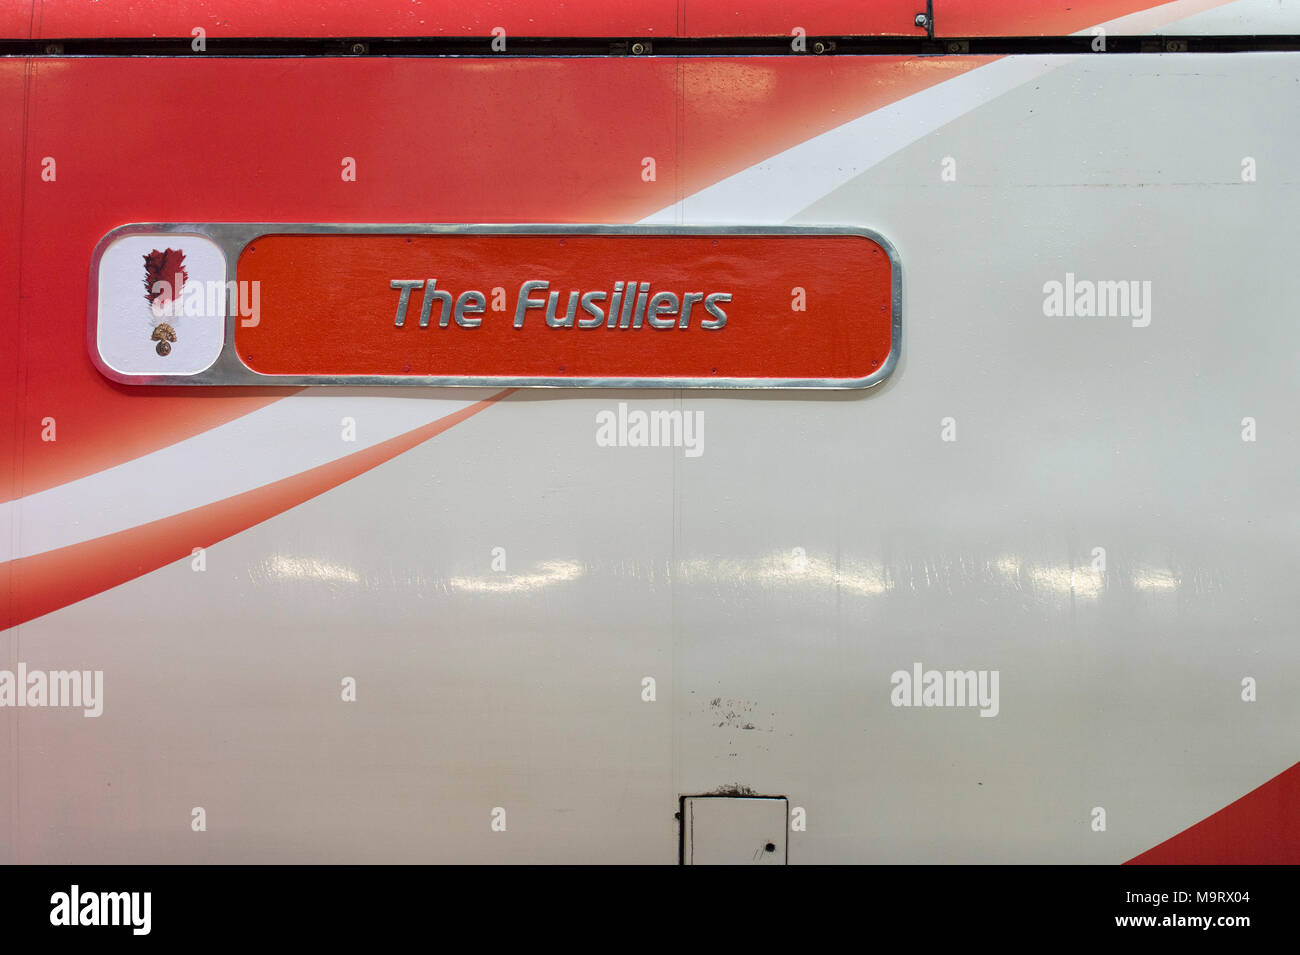 Kings Cross, London, UK. 27 March 2018. The Royal Regiment of Fusiliers is honoured with the naming of a Virgin Trains Class 91 locomotive. Stock Photo